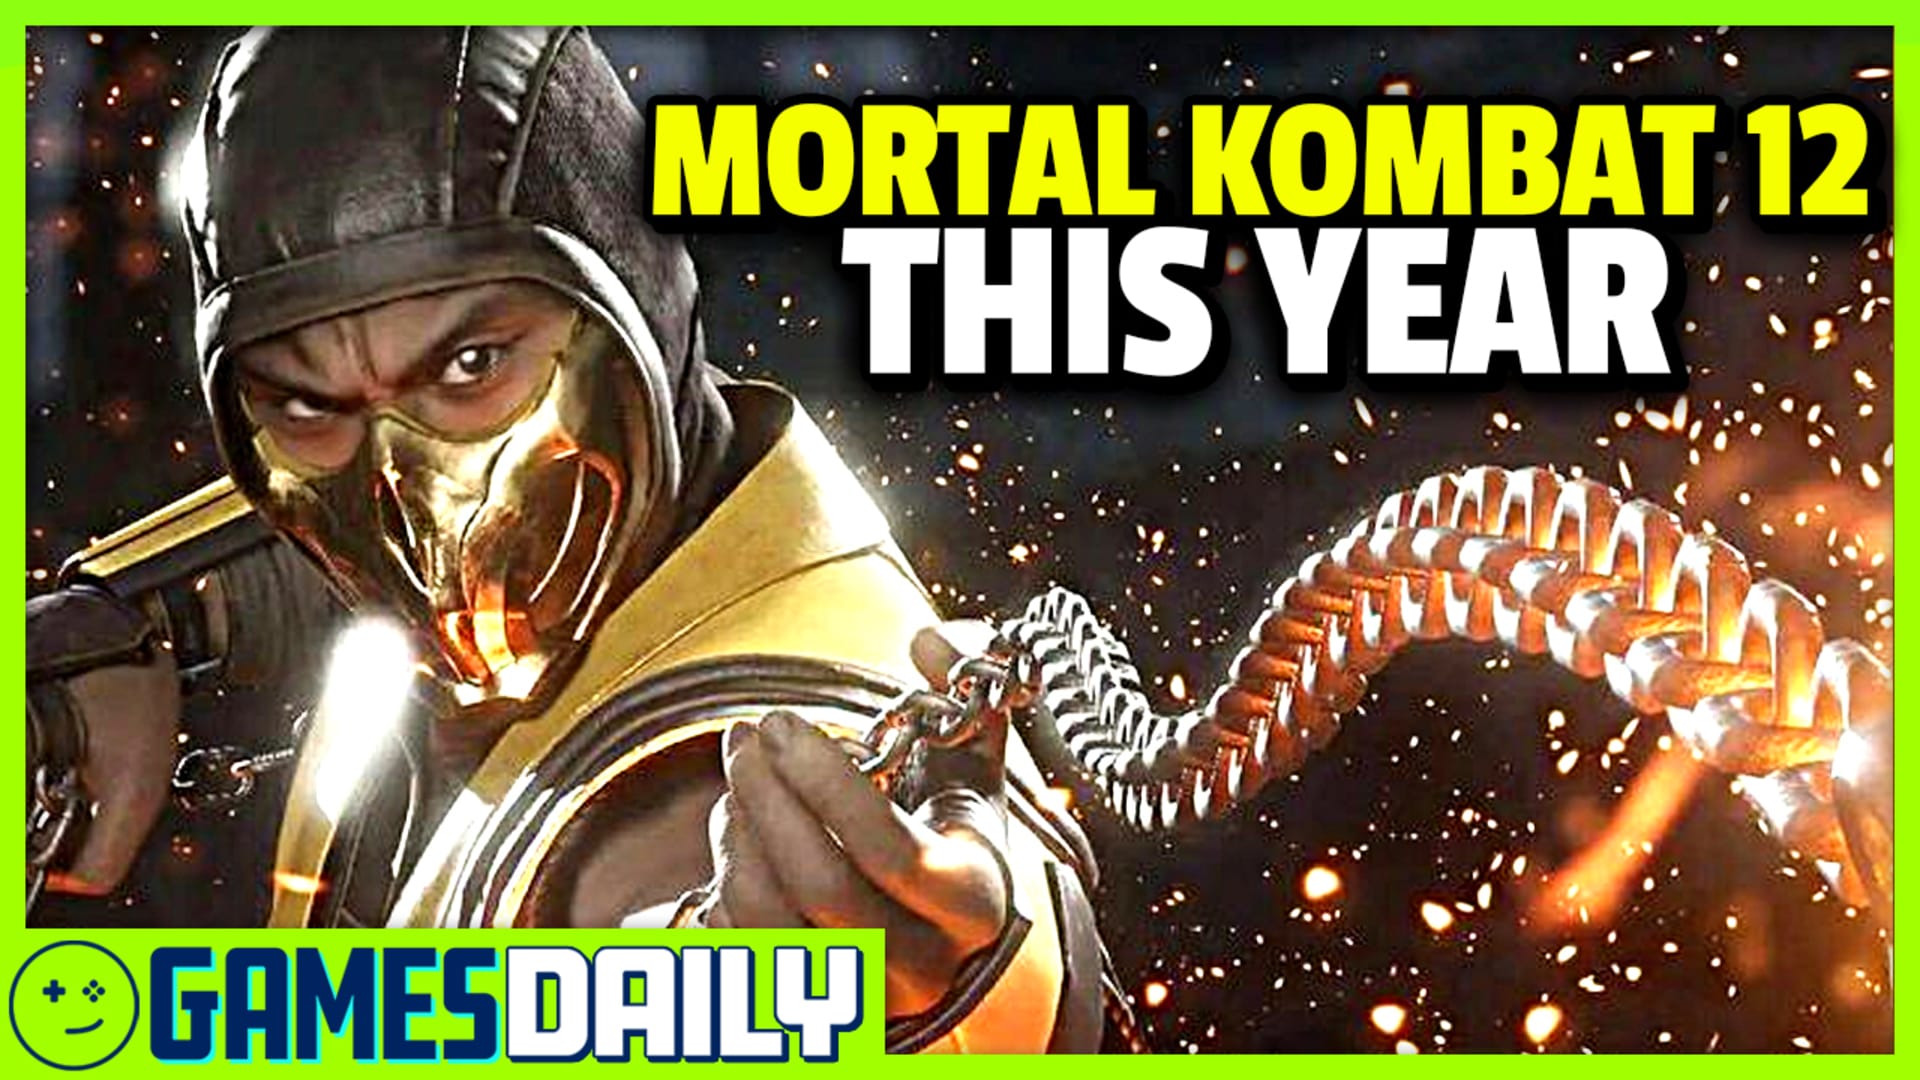 Mortal Kombat 12 is coming THIS YEAR! - Rooster Teeth